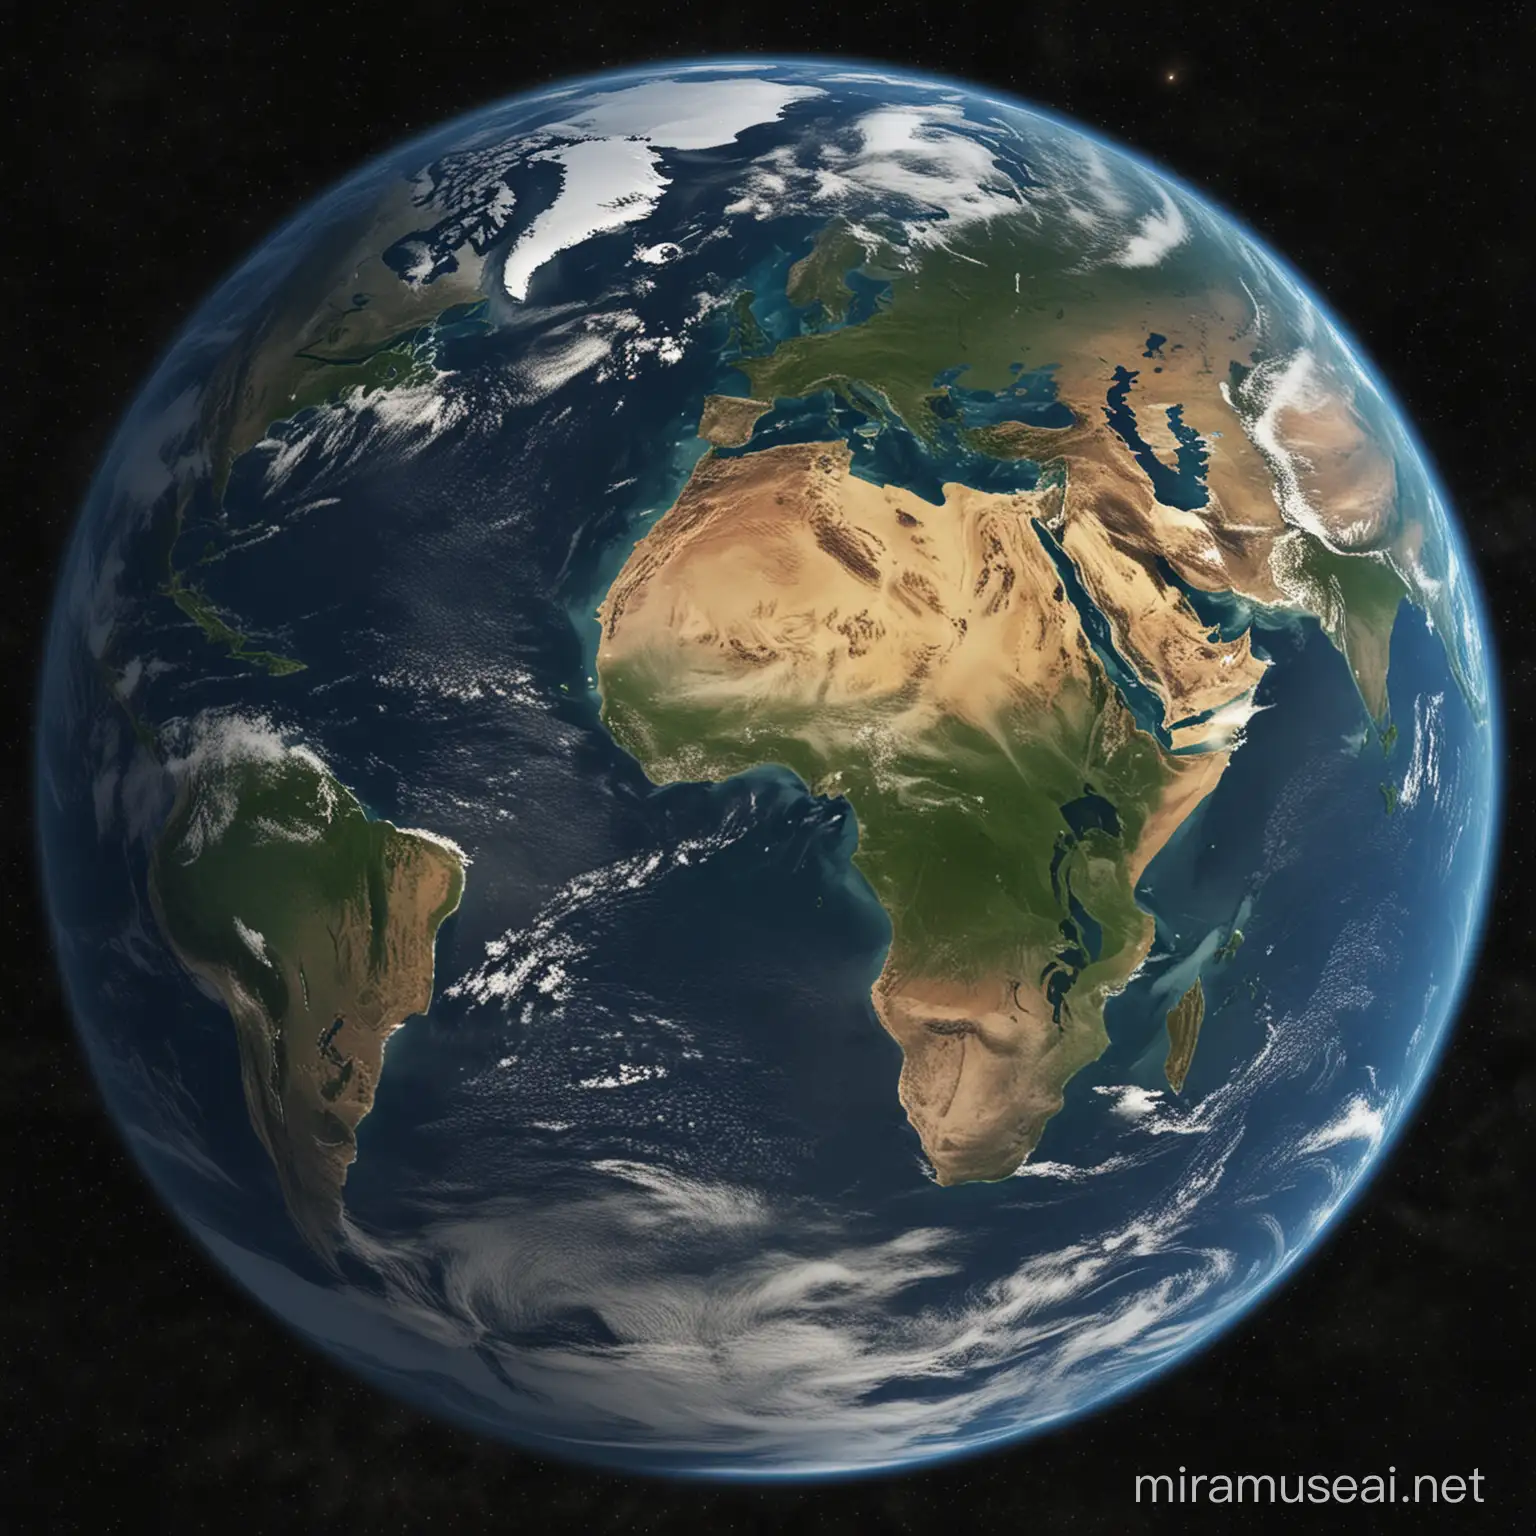 Generate an image of planet earth